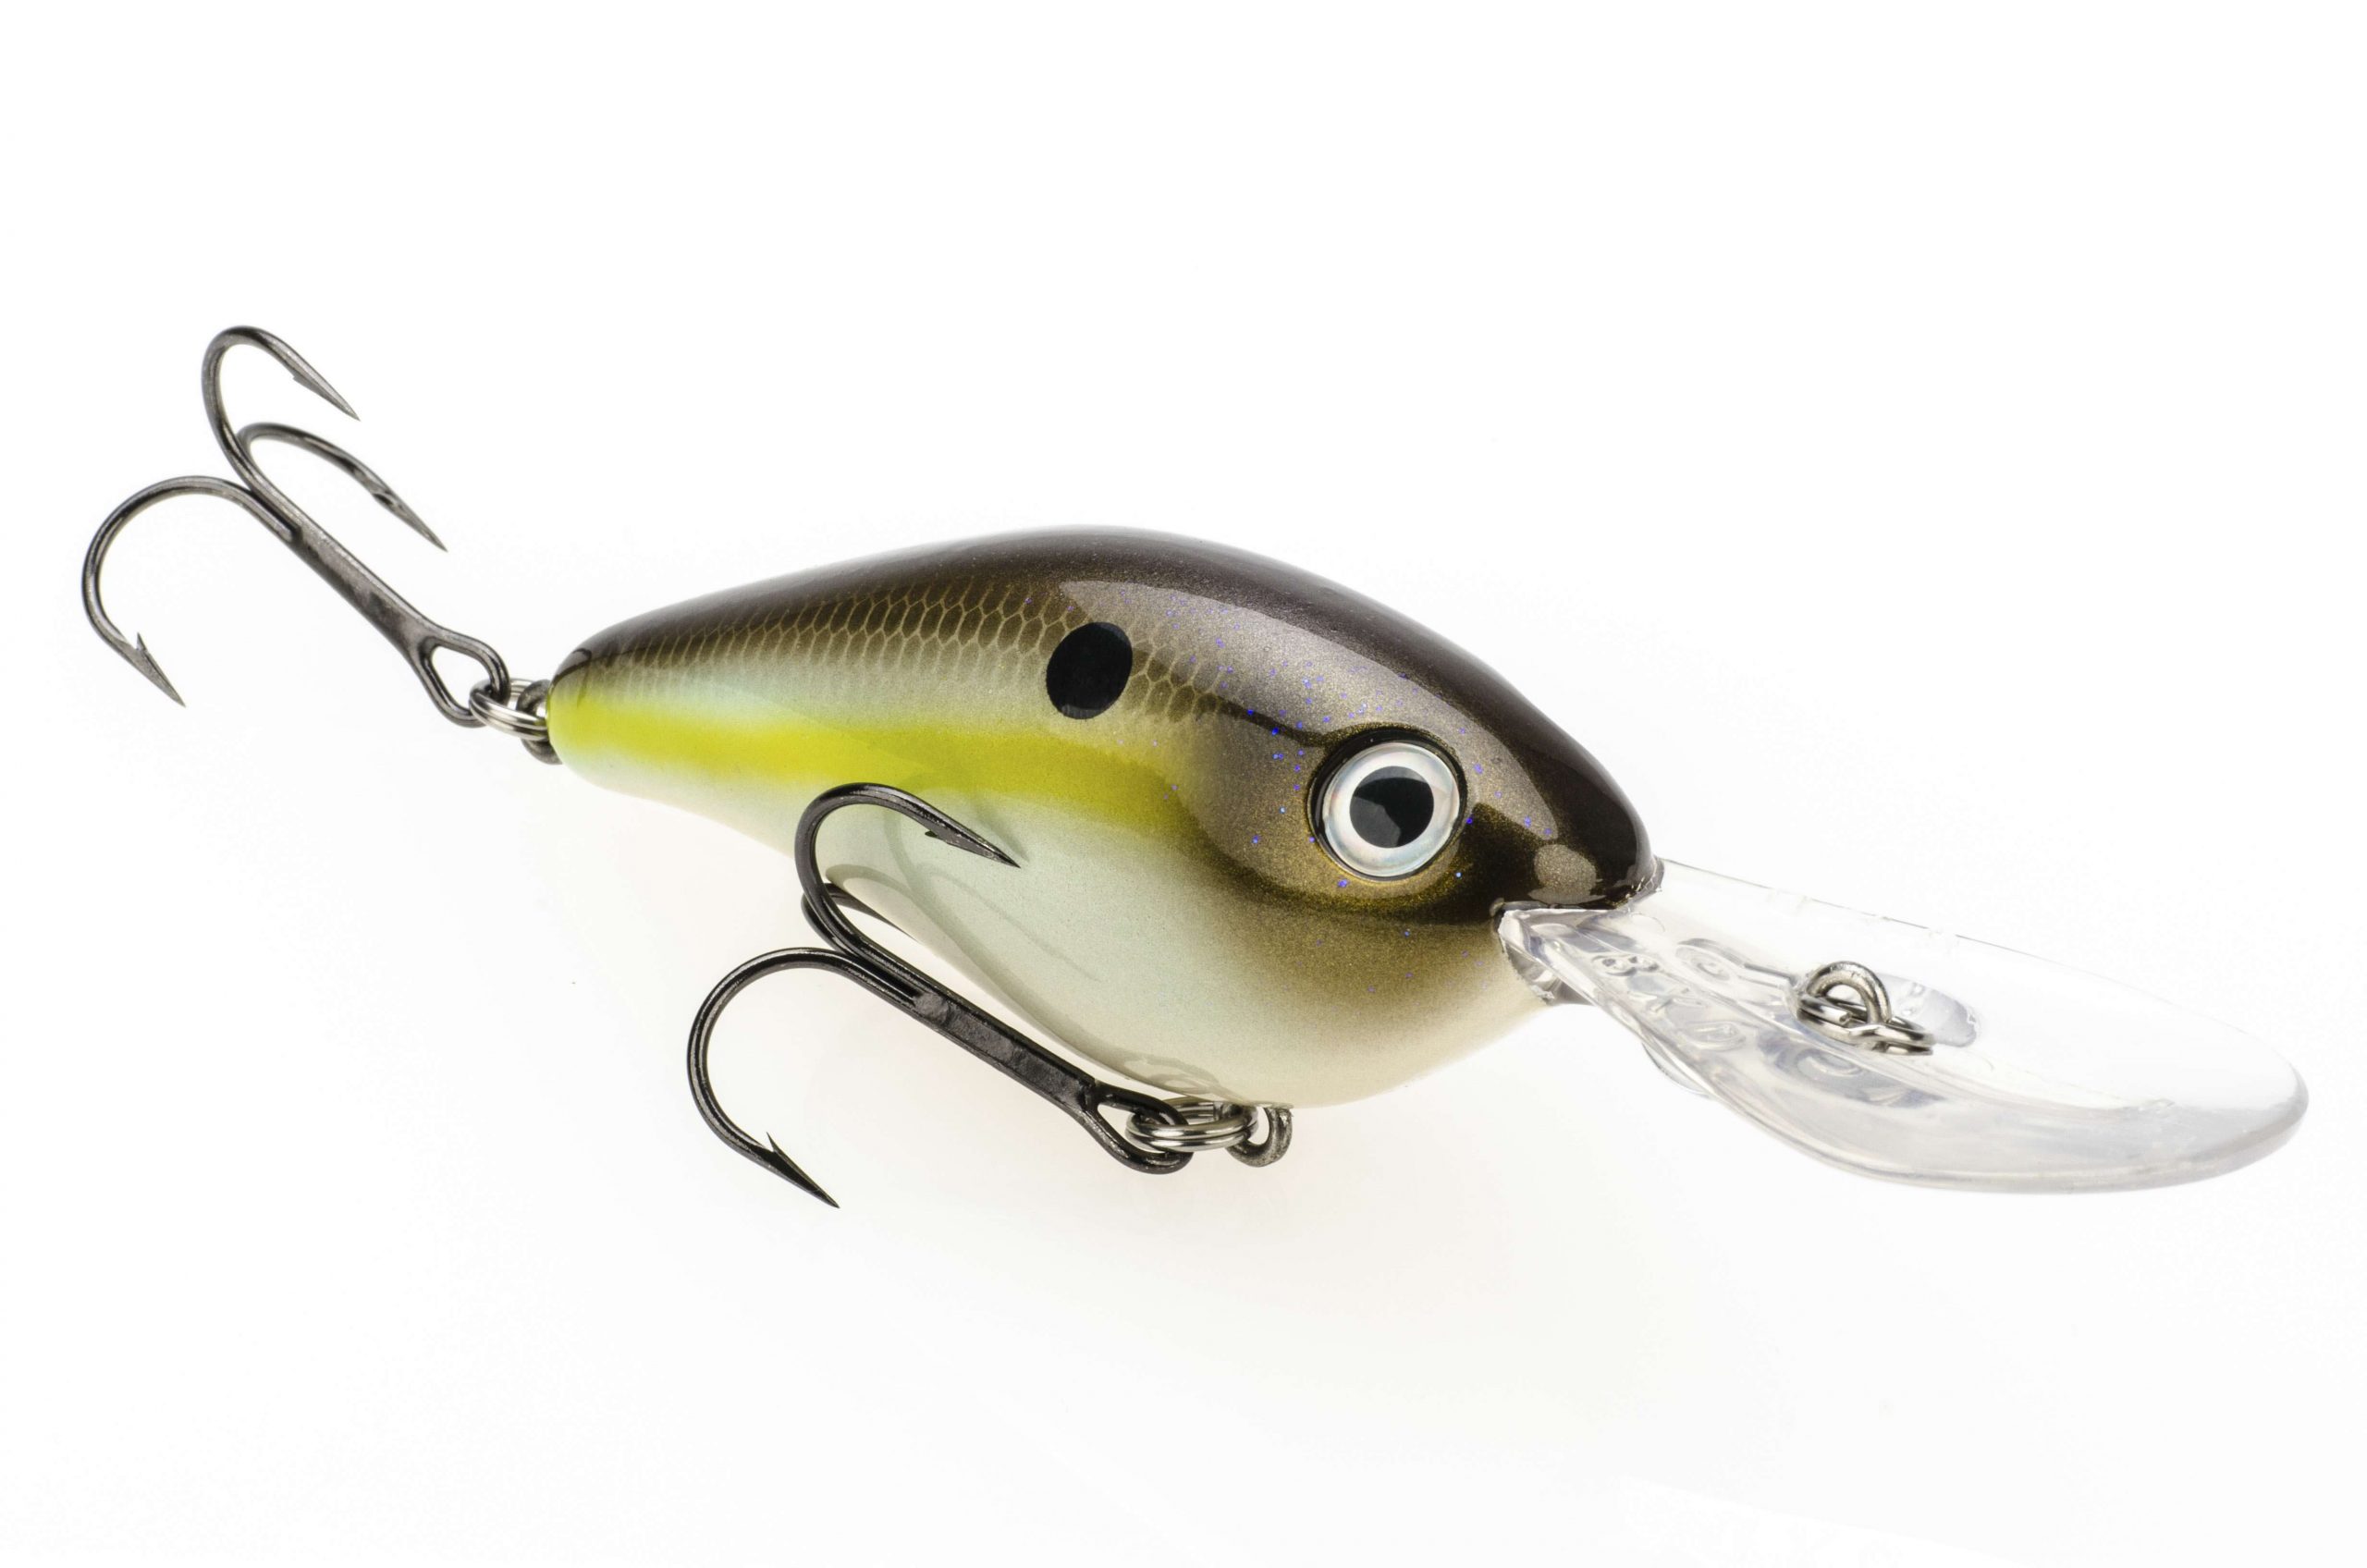 <b>STRIKE KING 8XD</b>
The Bassmaster Classic will be your first look at this long-anticipated crankbait from Strike King. The 8XD fits neatly between the ever-popular 6XD and the great big 10XD. You will be able to crank in the 15- to 22-foot range, depending on the line size you are using. This crankbait weighs 1.3 ounces and will be available in 23 pro-selected colors.